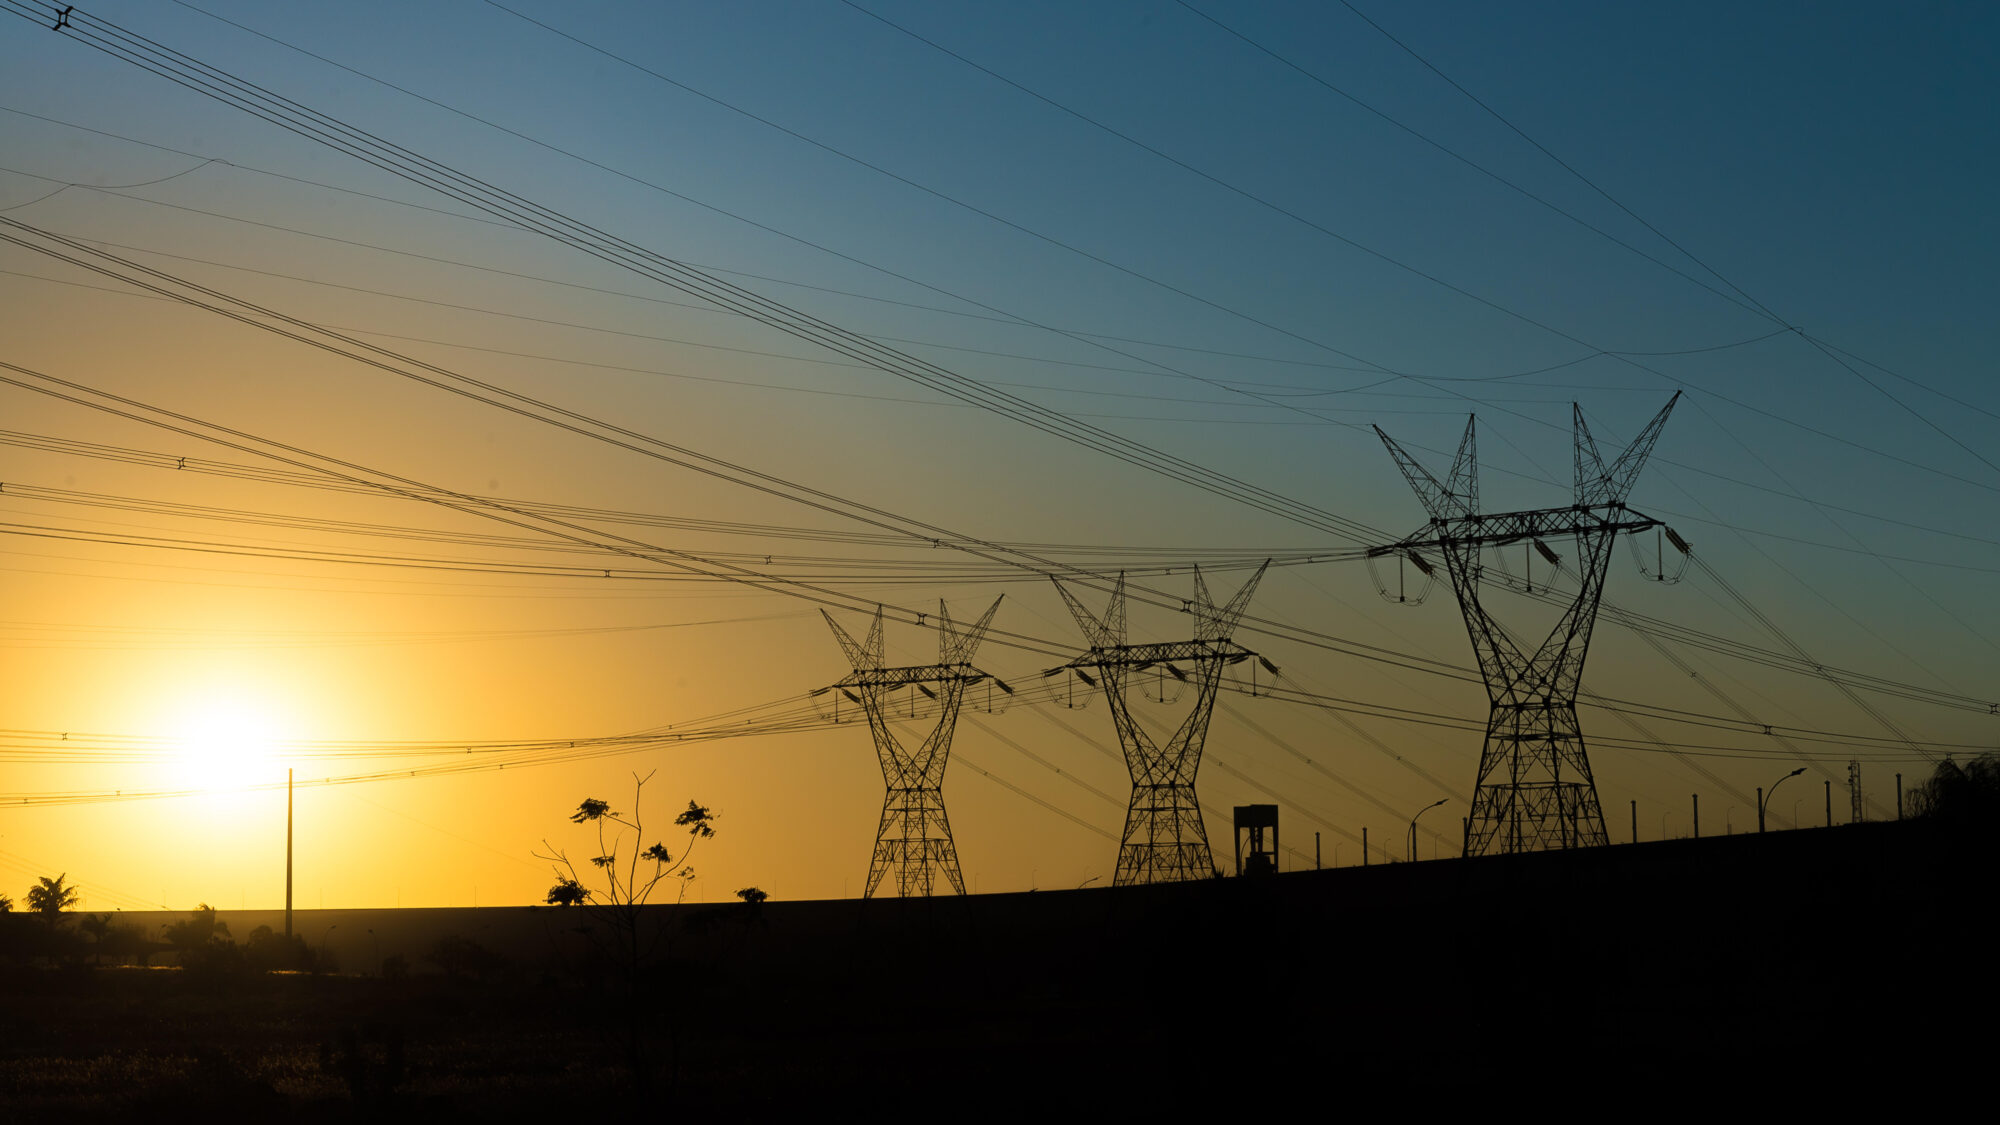 <p>Chinese electric power corporations have been deeply integrated in Brazil&#8217;s electricity sector since their first investment in the country in 2010 (Image:Alamy)</p> <div id="gtx-trans" style="position: absolute; left: 698px; top: -13.7812px;"> <div class="gtx-trans-icon"></div> </div>